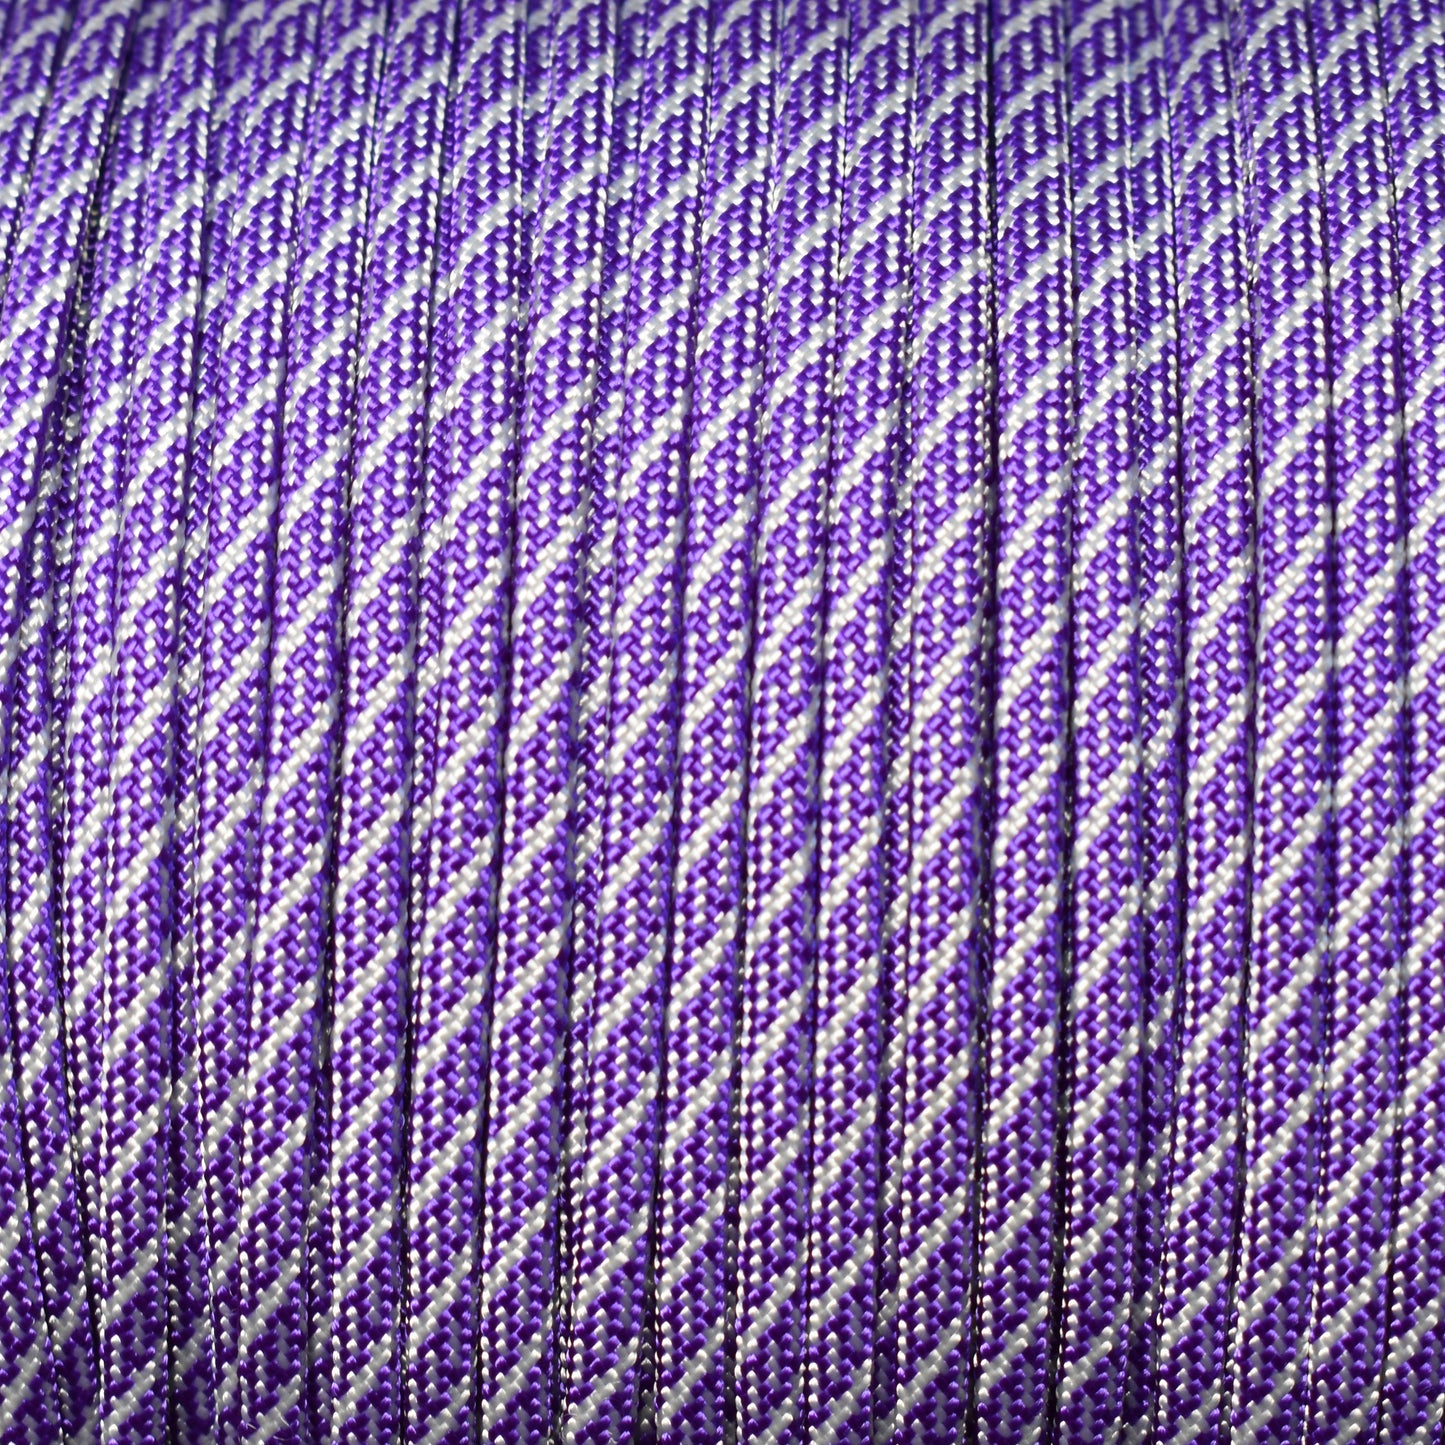 550 Paracord Acid Purple with Silver Helix Made in the USA Nylon/Nylon (1000 FT.)